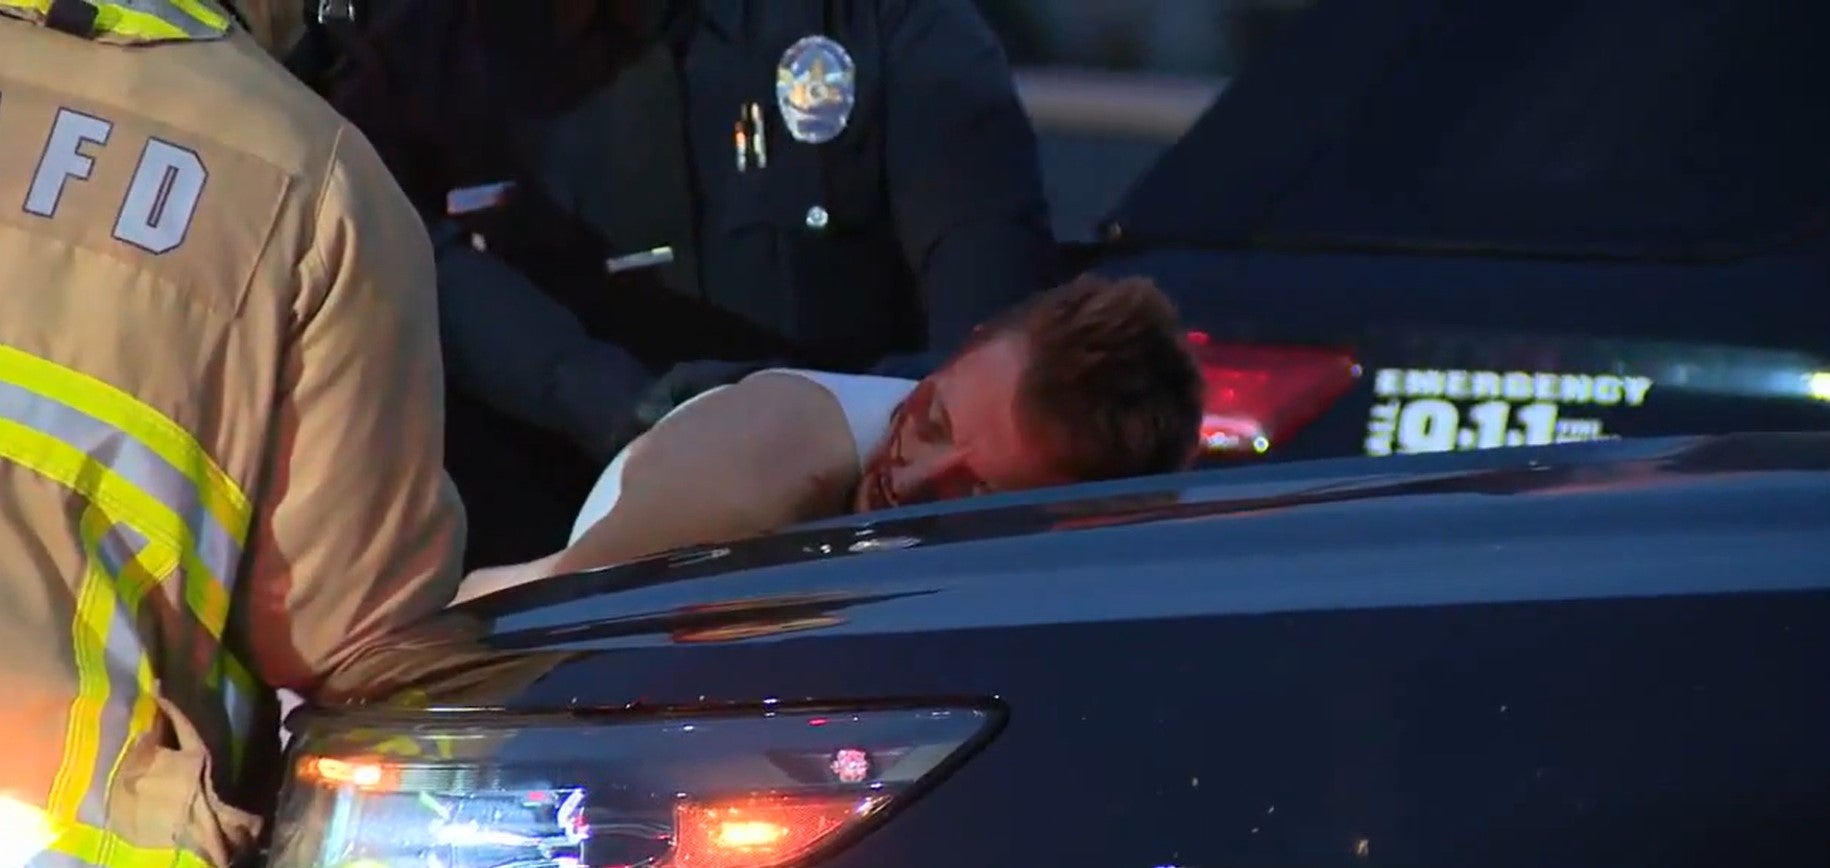 The suspect was arrested shortly after the multi-vehicle collision on Freeway 405, Los Angeles